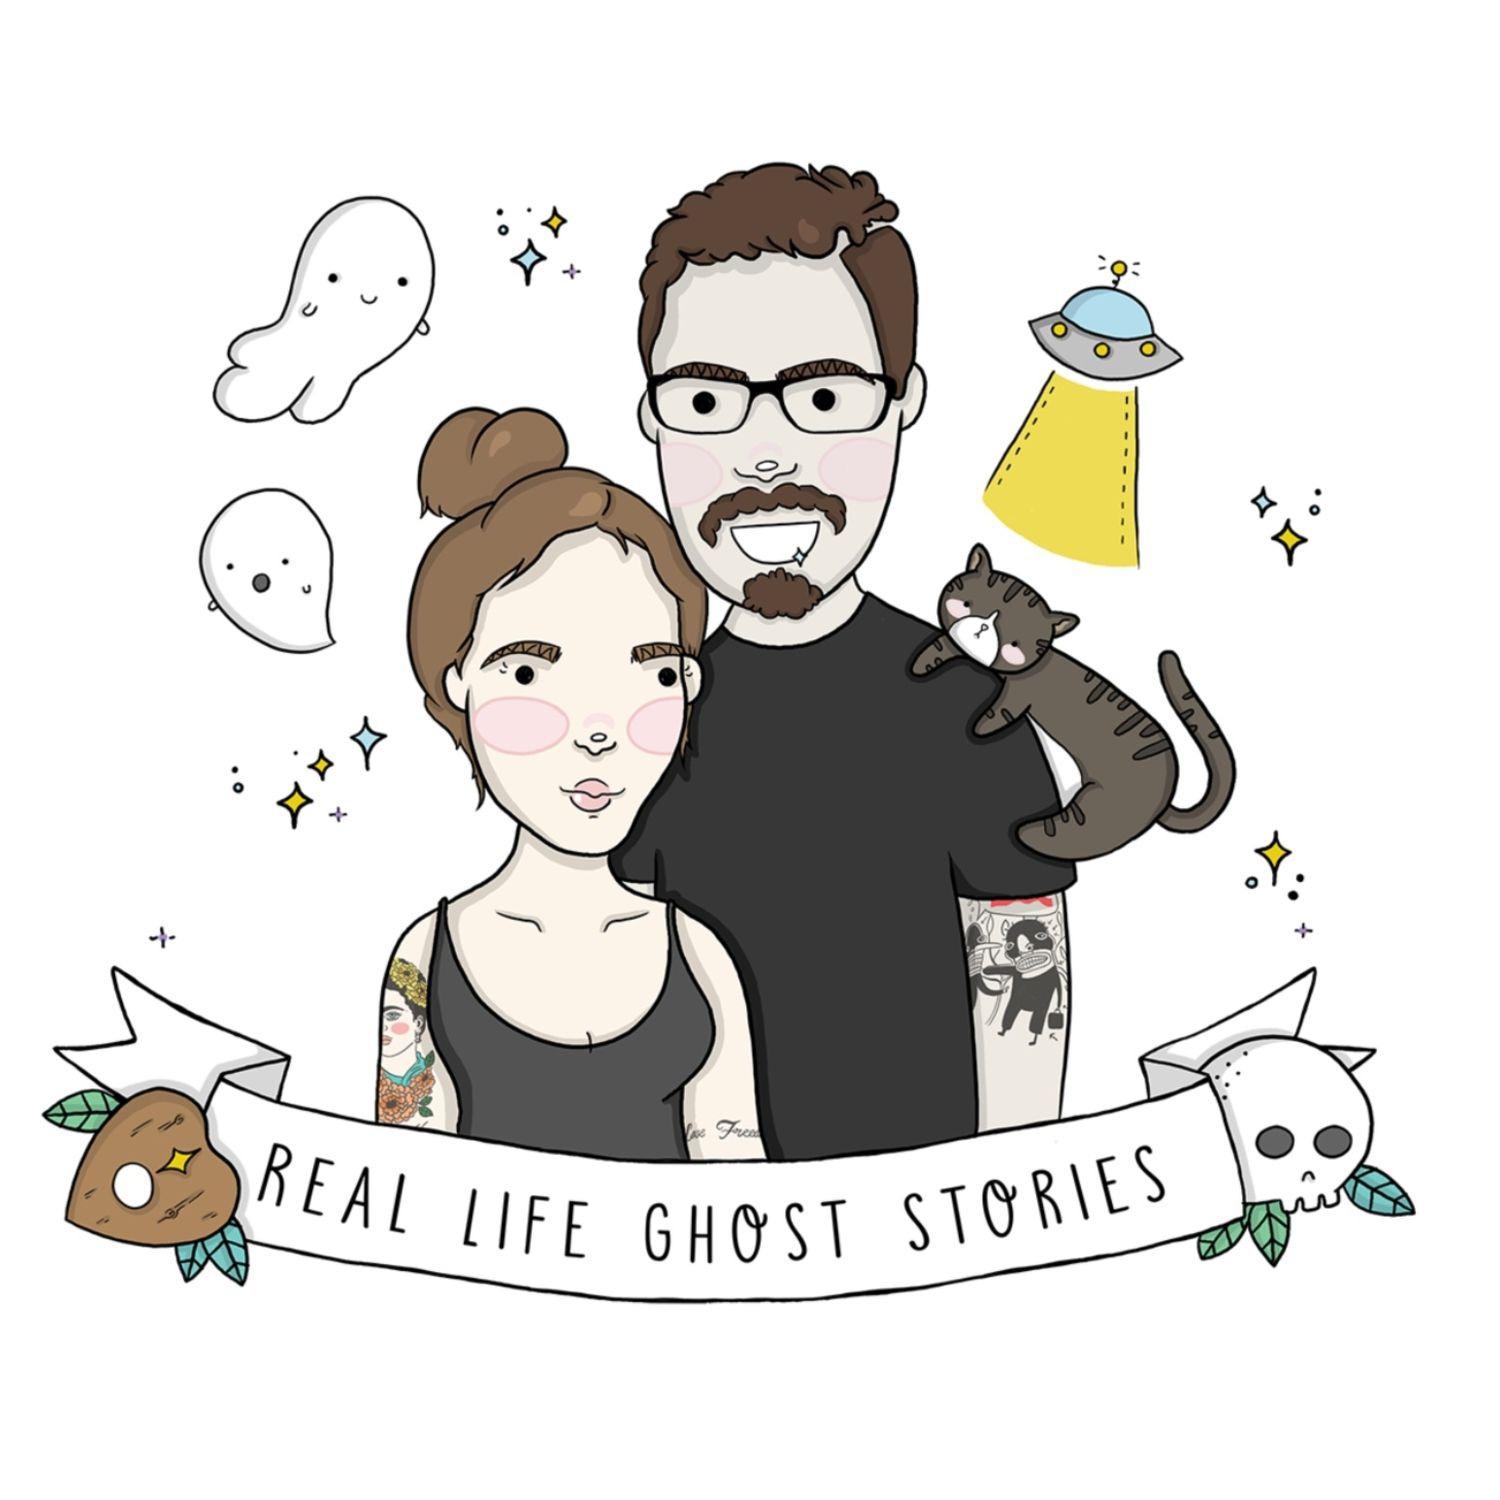 Advertise on “Real Life Ghost Stories Podcast”